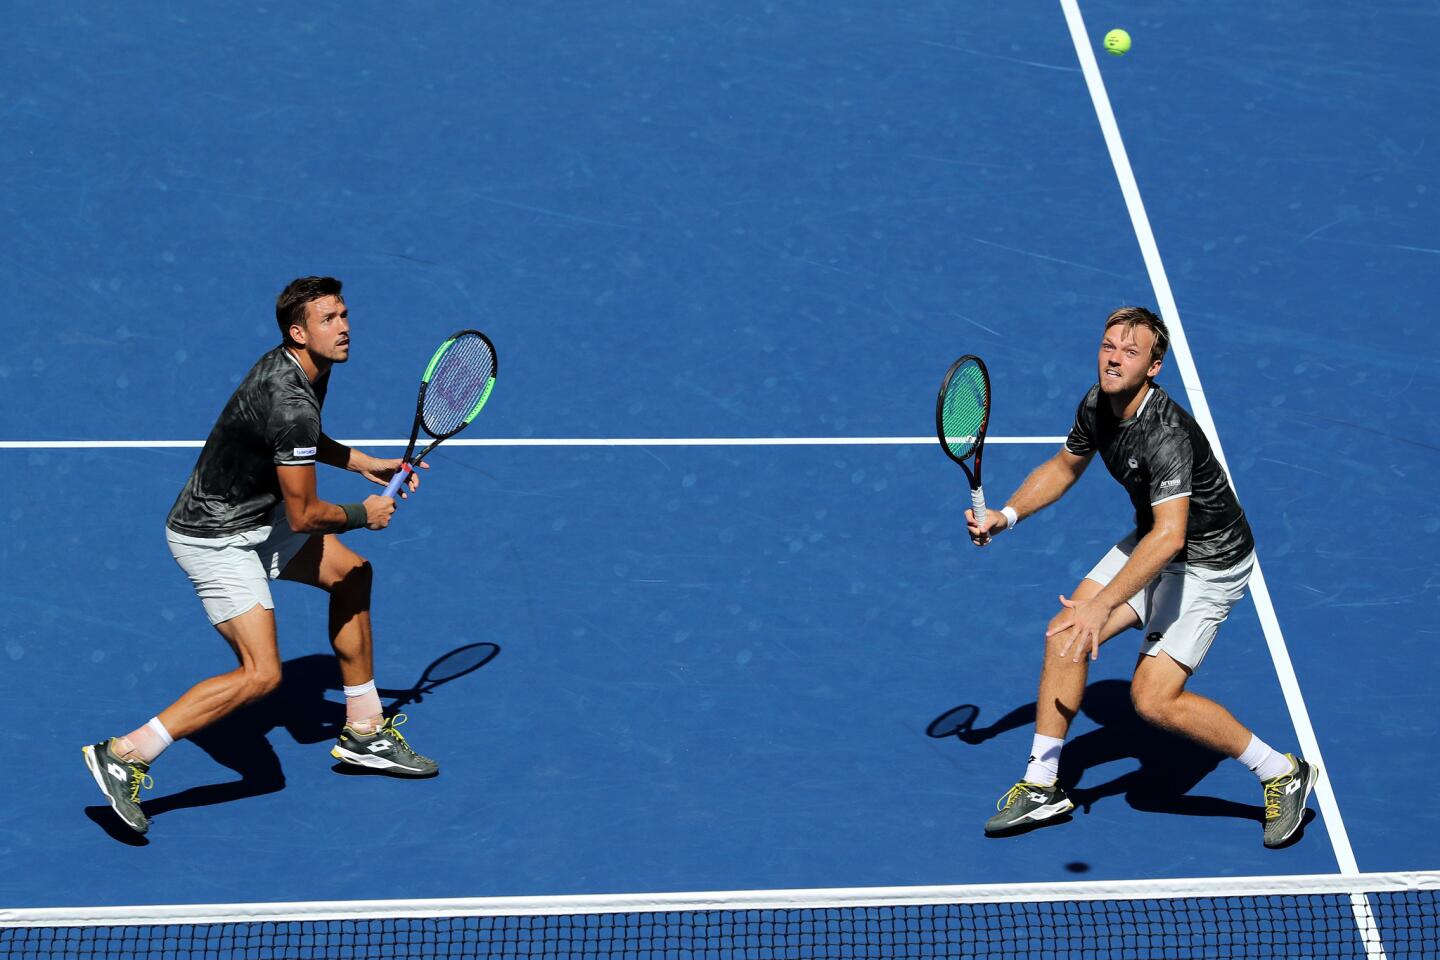 Kevin Krawietz and Andreas Mies of Germany in action during their Men's Doubles quarterfinal match against Leonardo Mayer of Argentina and Joao Sousa of Portugal on day nine of the 2019 U.S. Open at the USTA Billie Jean King National Tennis Center on Sept. 3, 2019, in Queens.